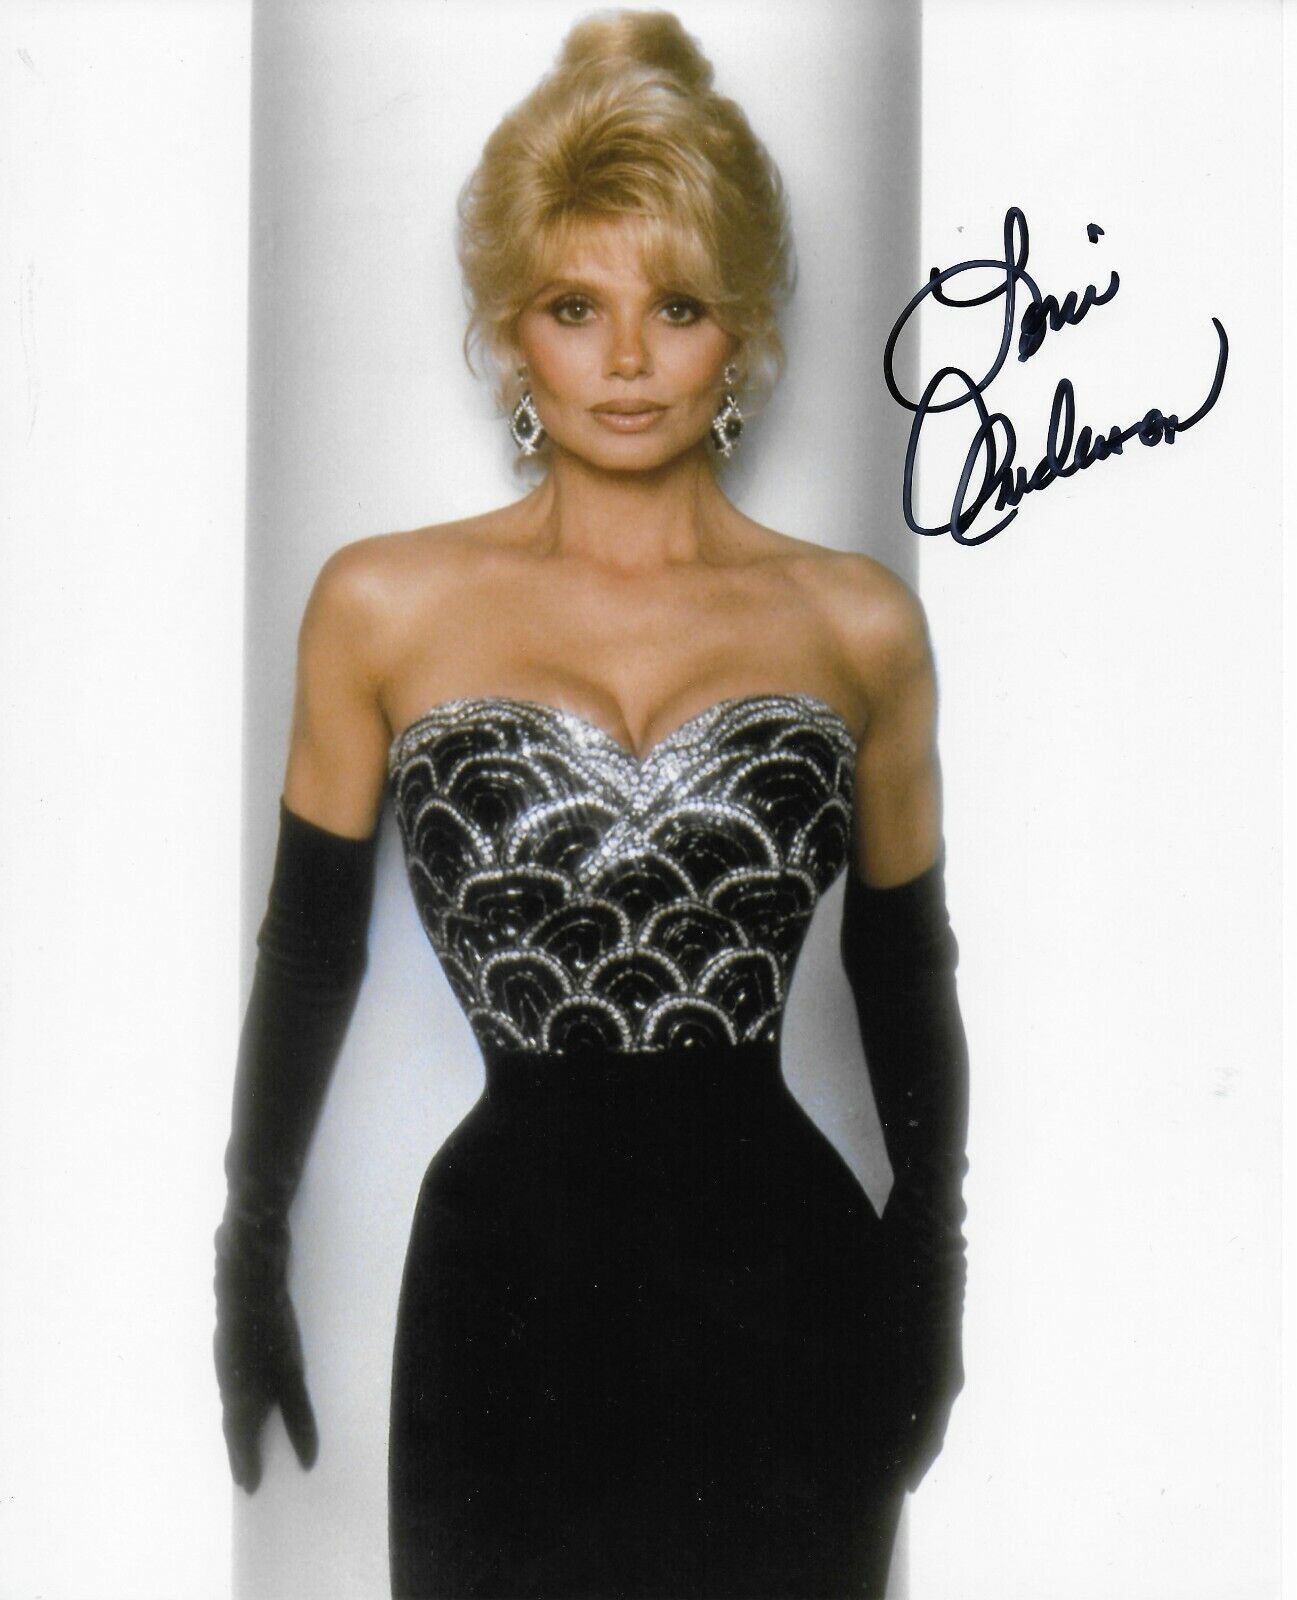 Loni Anderson Signed 8x10 Photo Poster painting - WKRP in Cincinnati BABE - GORGEOUS!!! #11